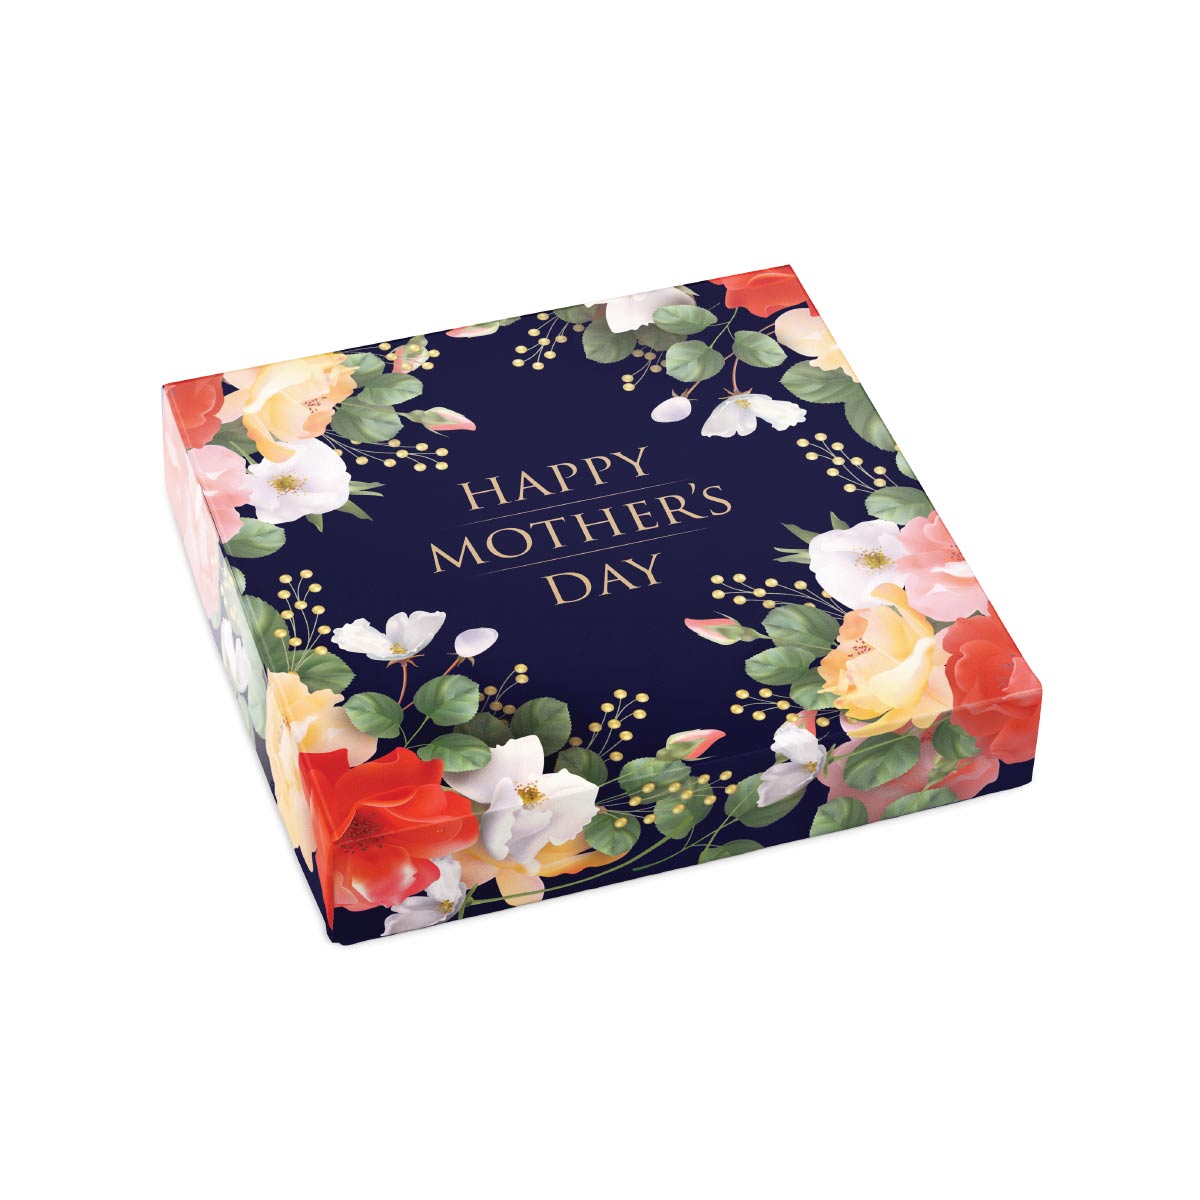 Happy Mother's Day Flower Gift Box Sugar Free Assorted Chocolates for Mom